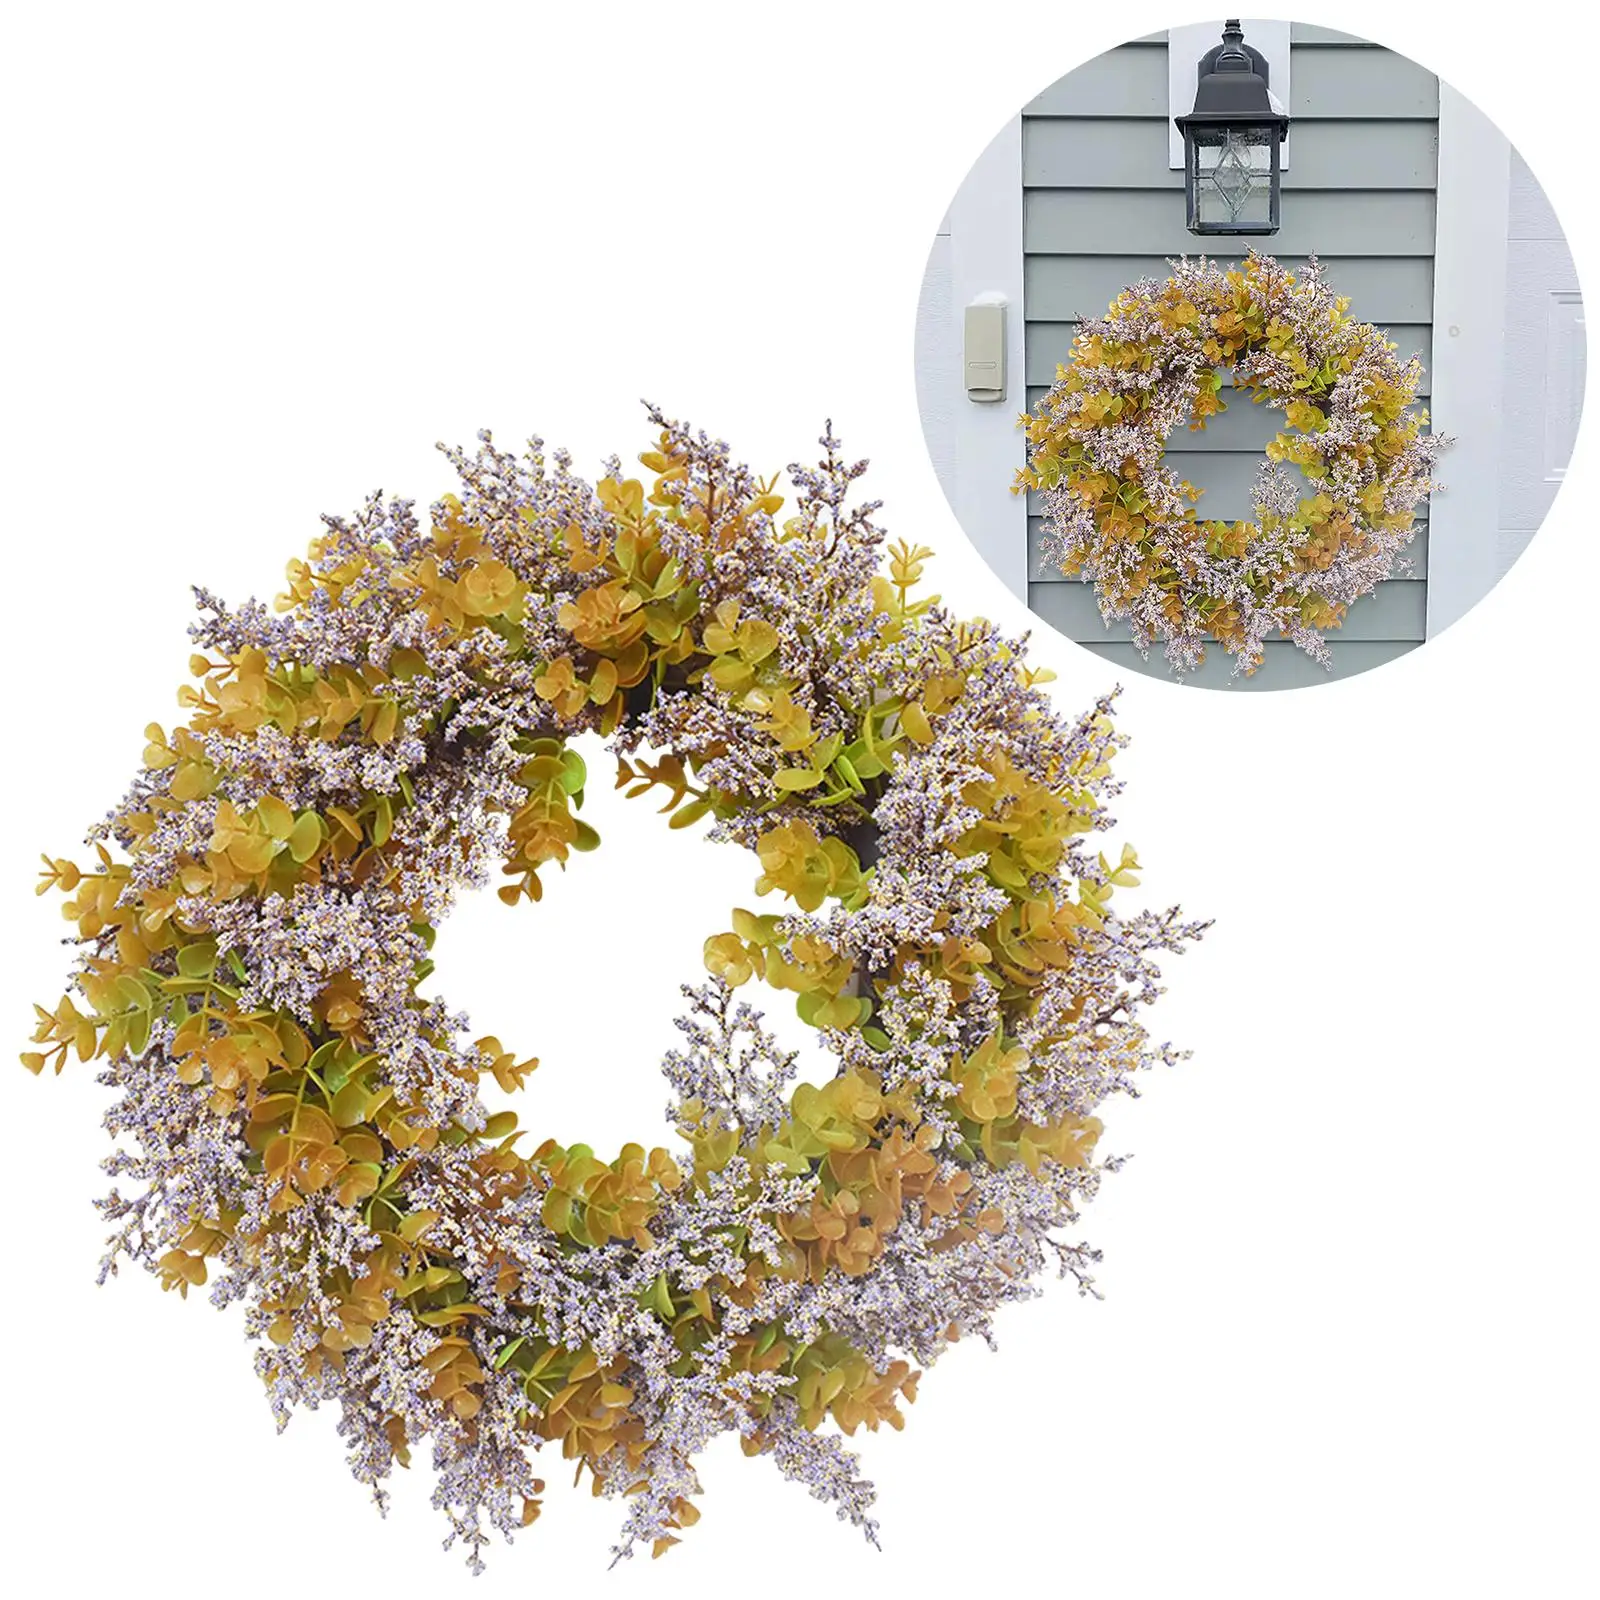 Artificial Wreath, Wall Hanging Wreath 18`` Eucalyptus Leaf Wreath Round Wreath for The Front Door Home Party Wedding Decoration